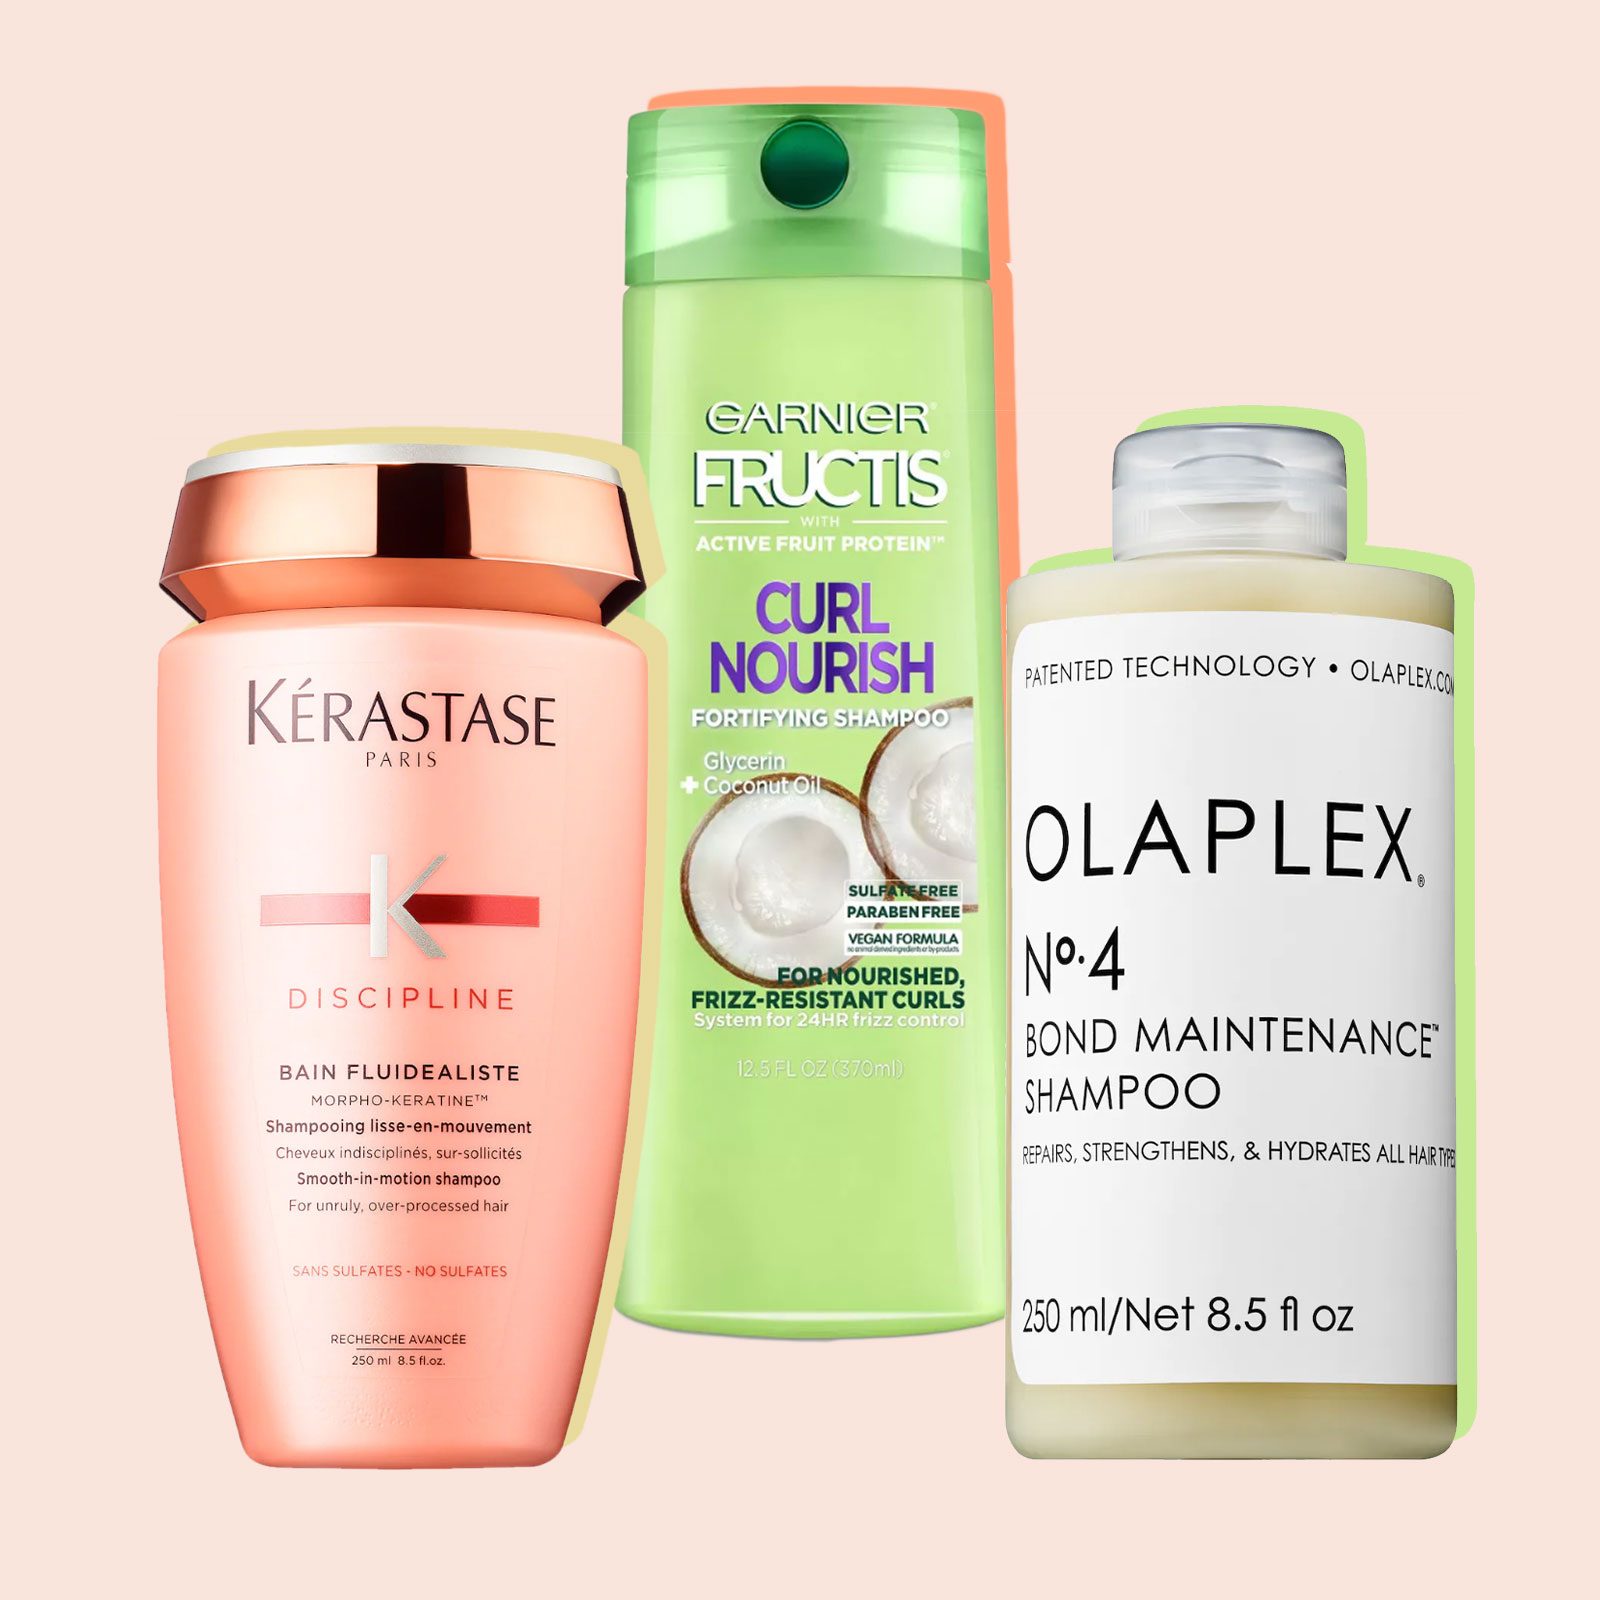 Colorful image of three different shampoos from this list